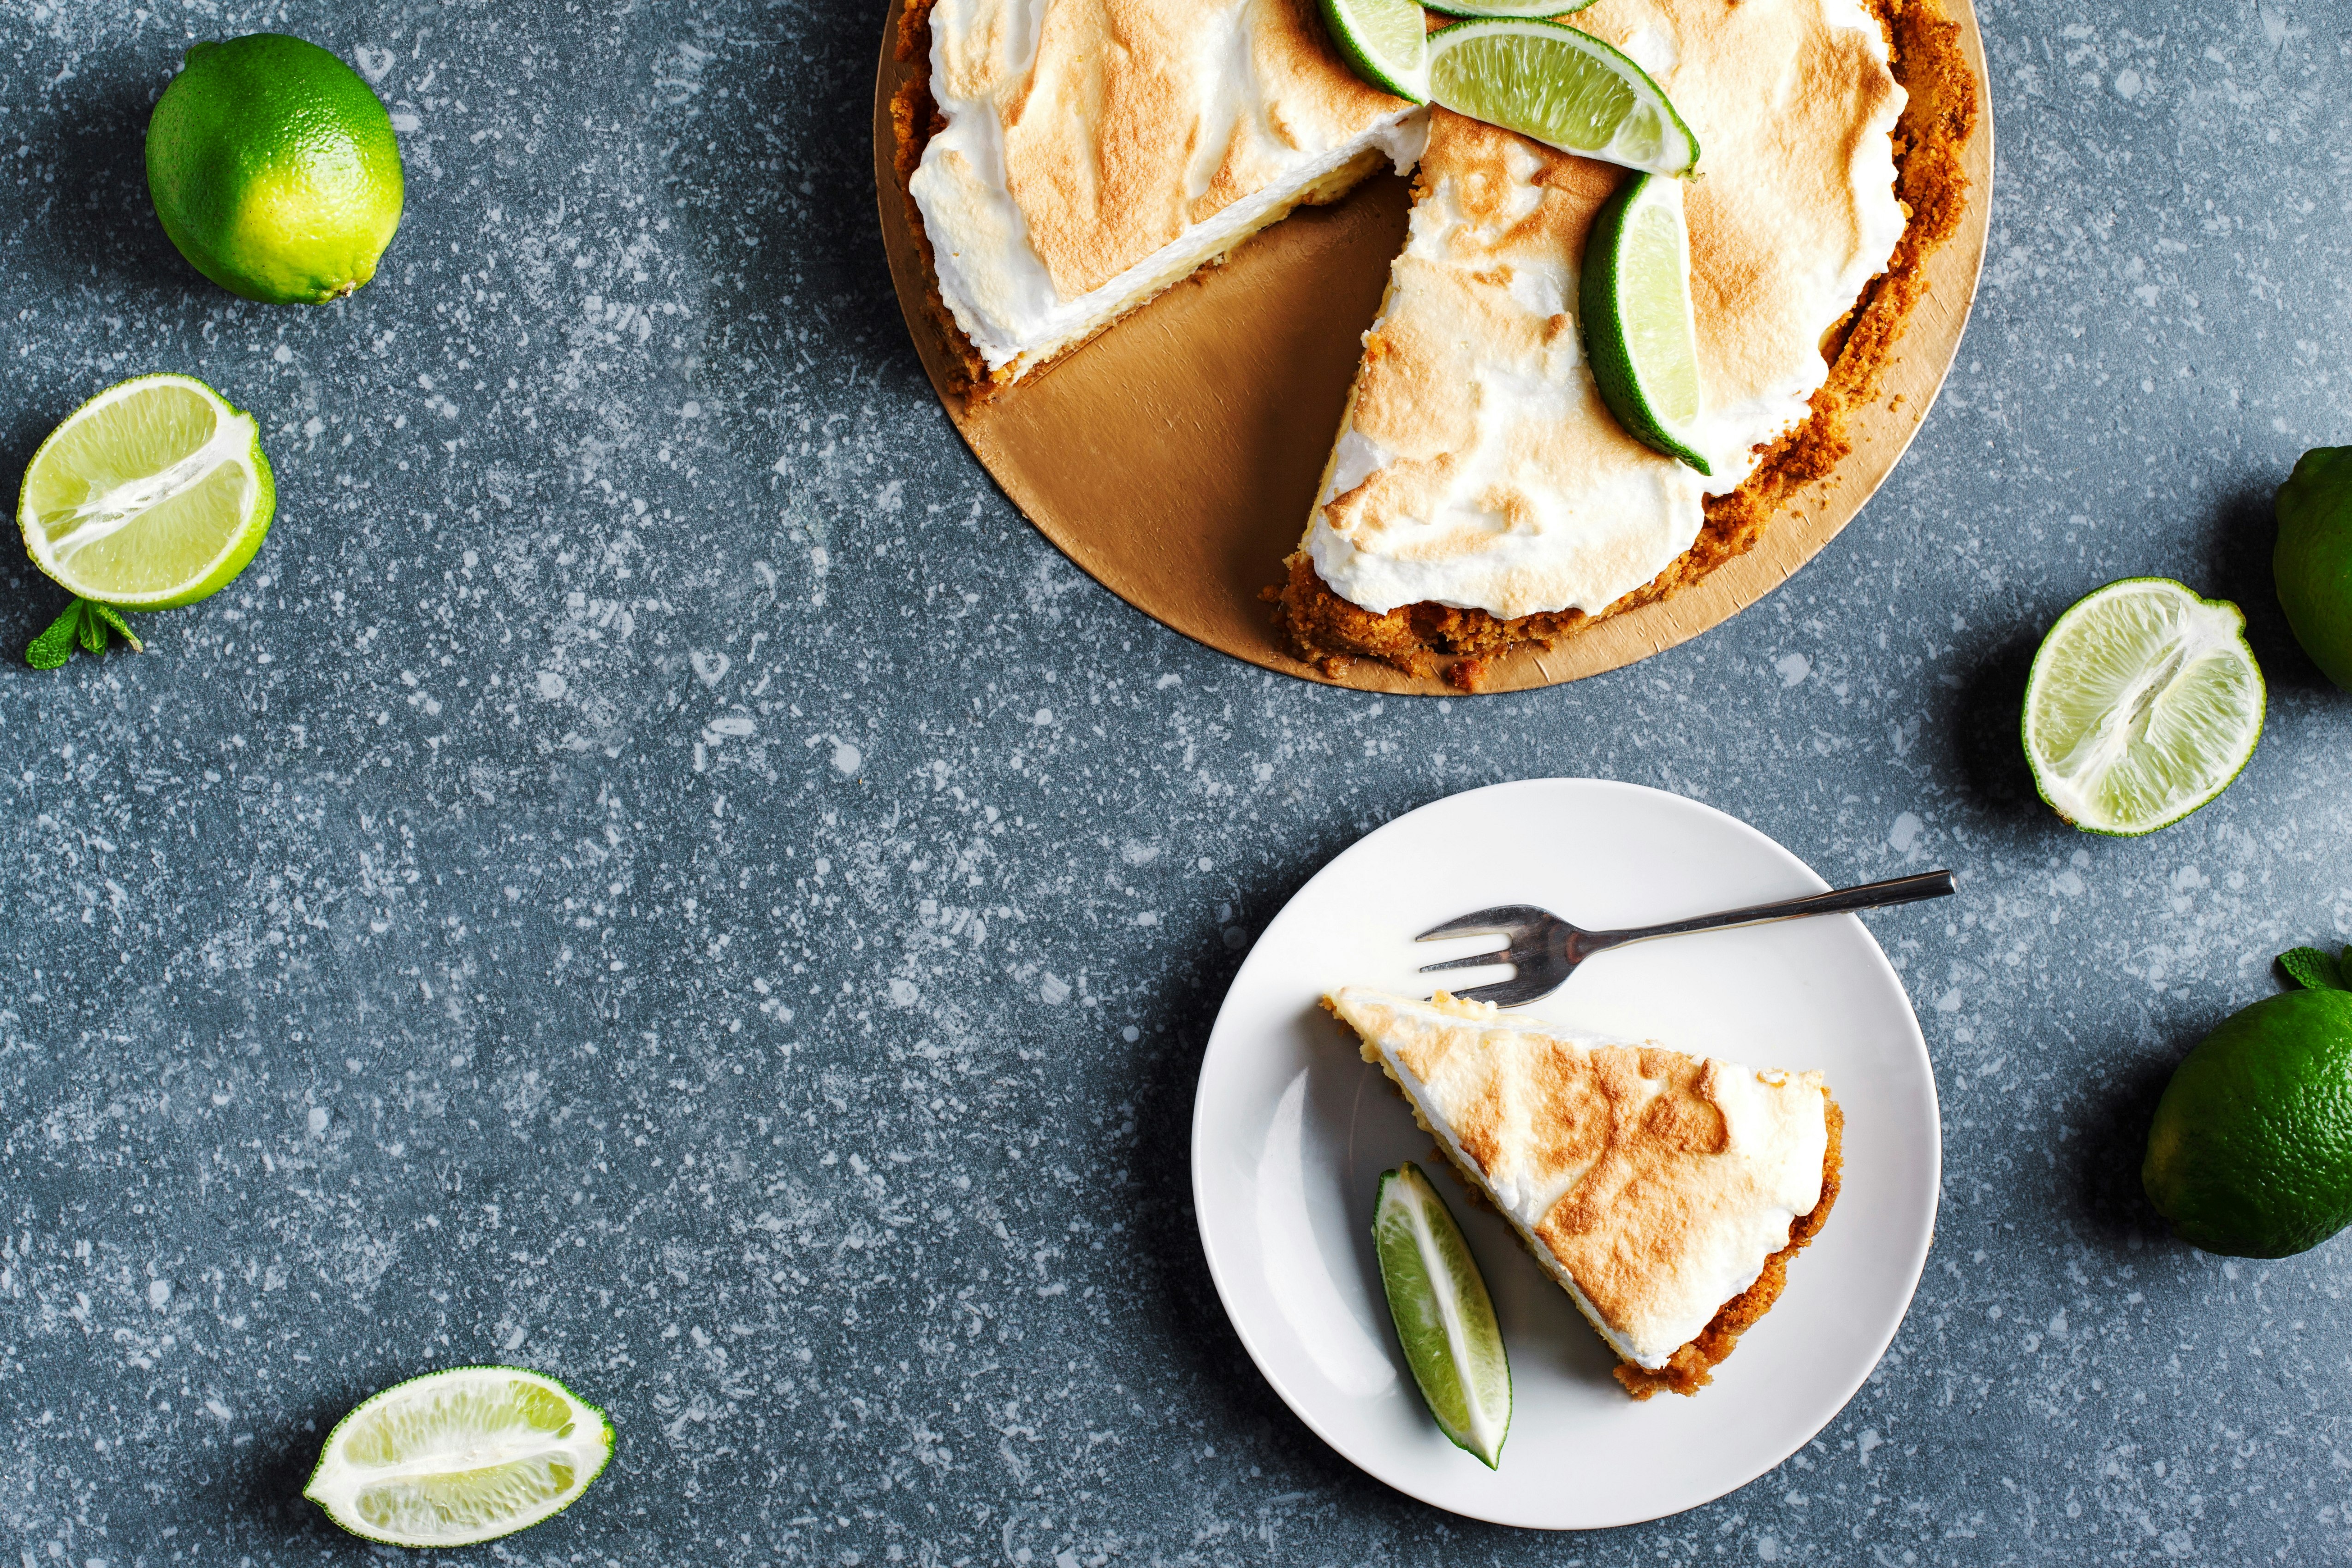 A wedge of a lime serves as garnish next to a slice of key lime pie. There is a fork at the top of the small plate. A few limes (some sliced into sections) are positioned around the plate and the full pie. 